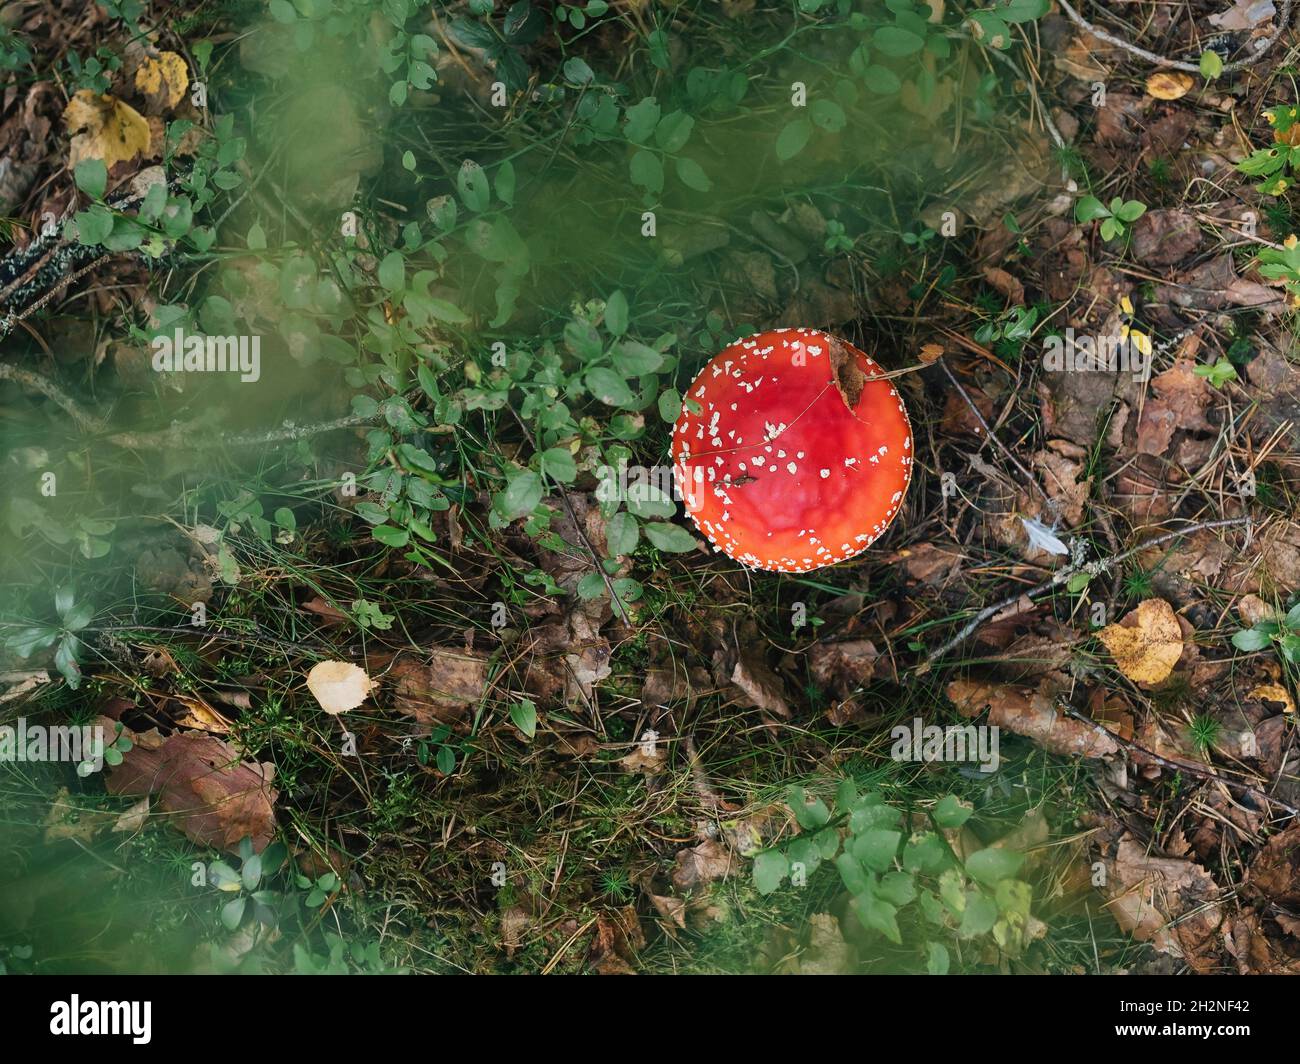 Champignons agaric Fly in forest Banque D'Images